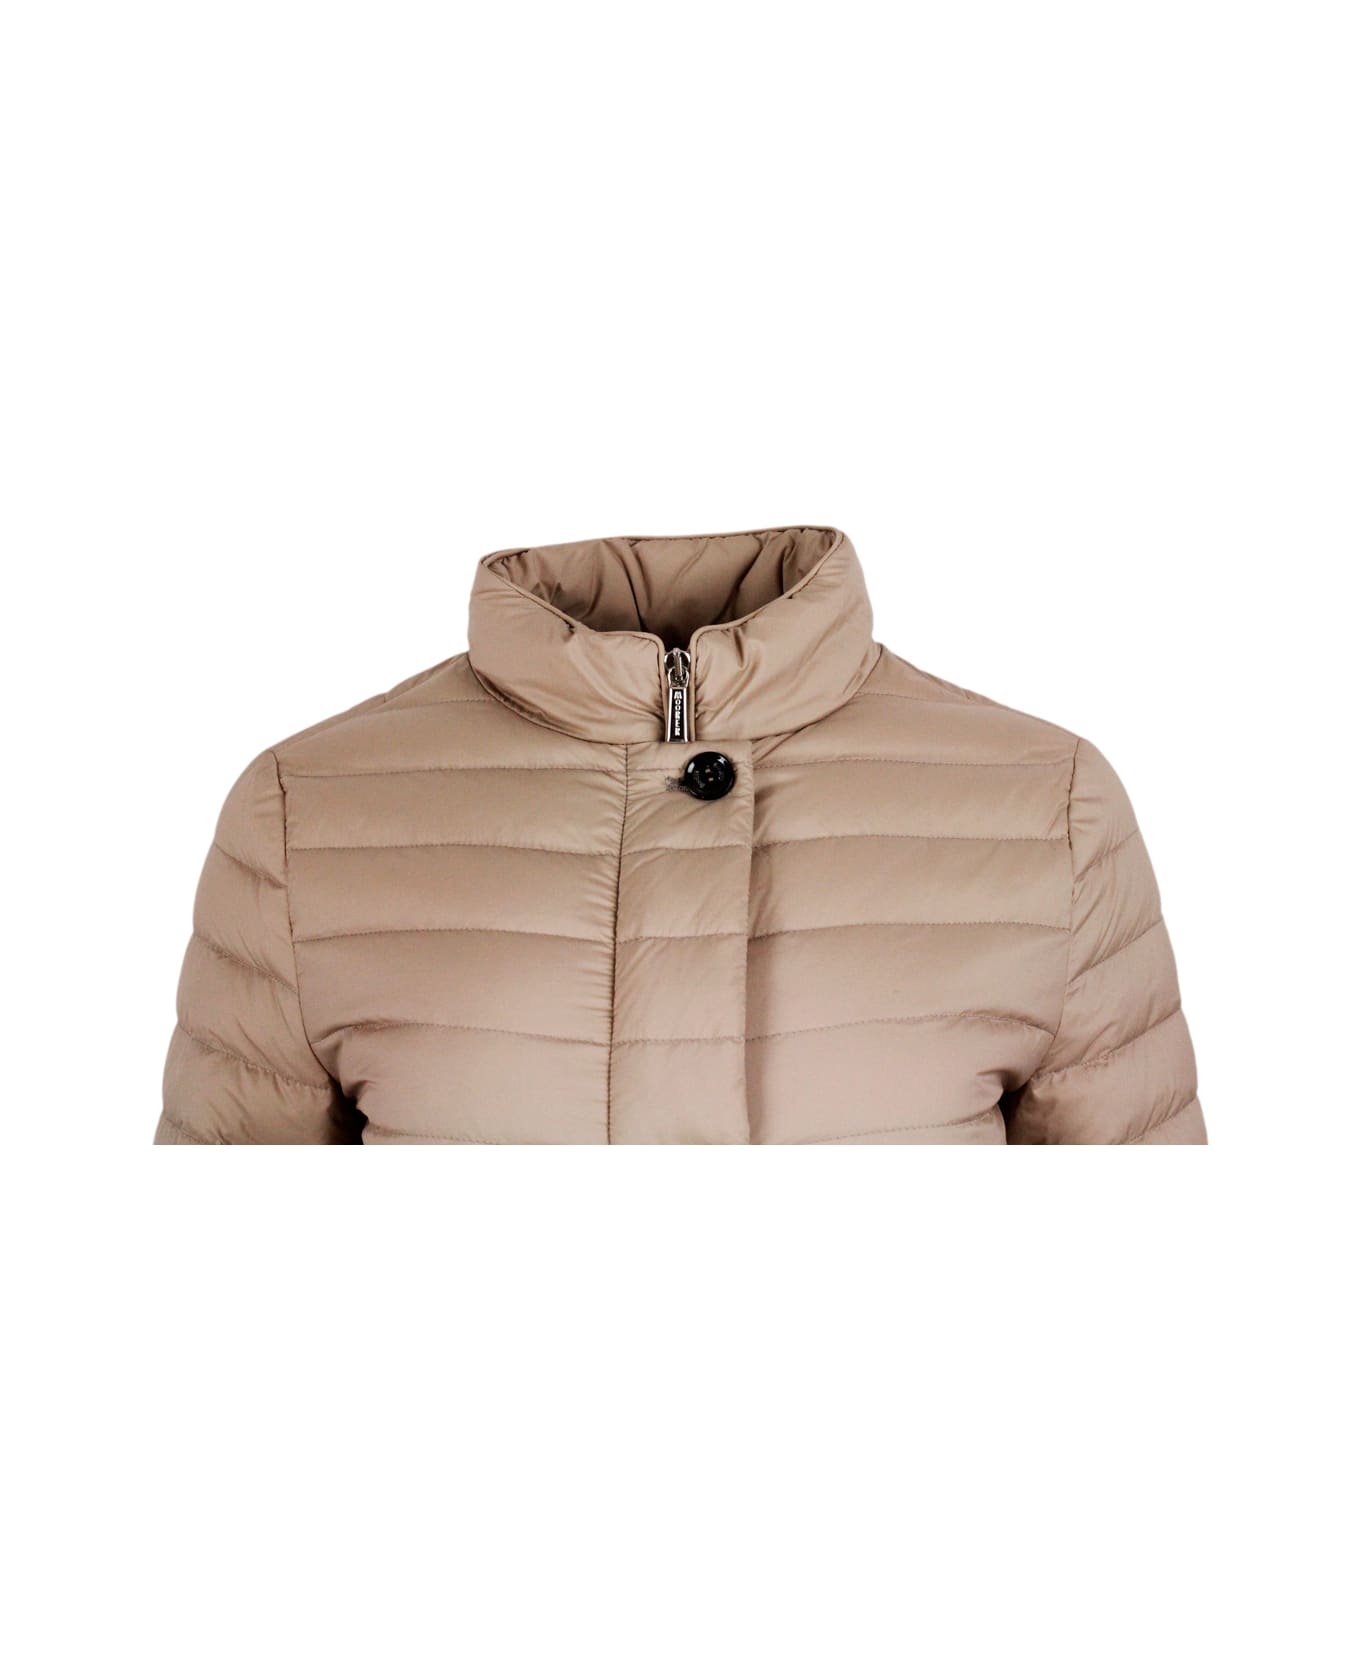 Moorer Light Down Jacket With Zip And Button Closure With Front Flap Pockets - Hazelnut